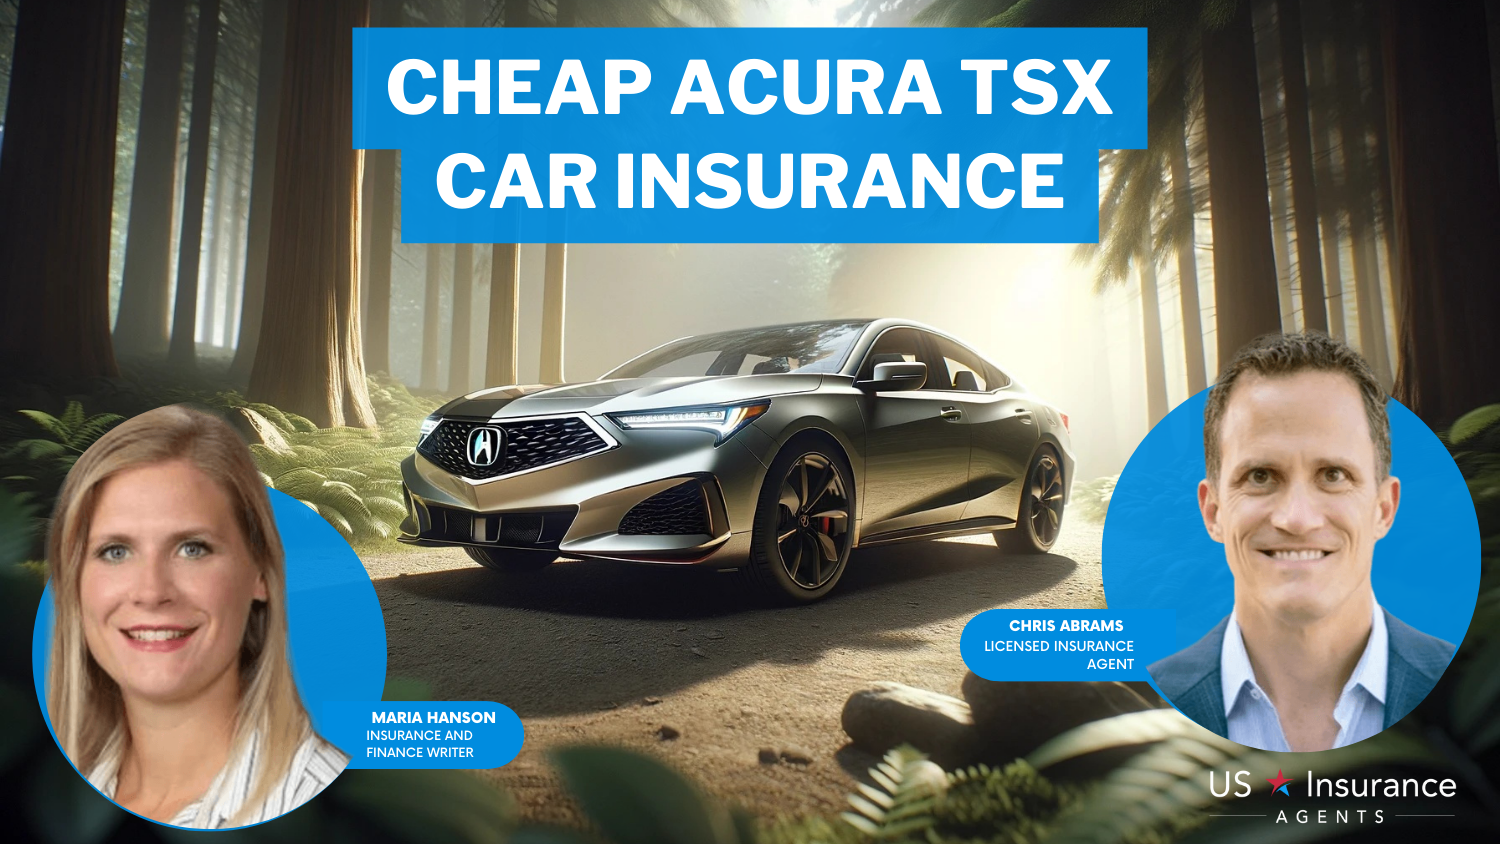 Cheap Acura TSX Car Insurance: State farm, Travelers, and Safeco